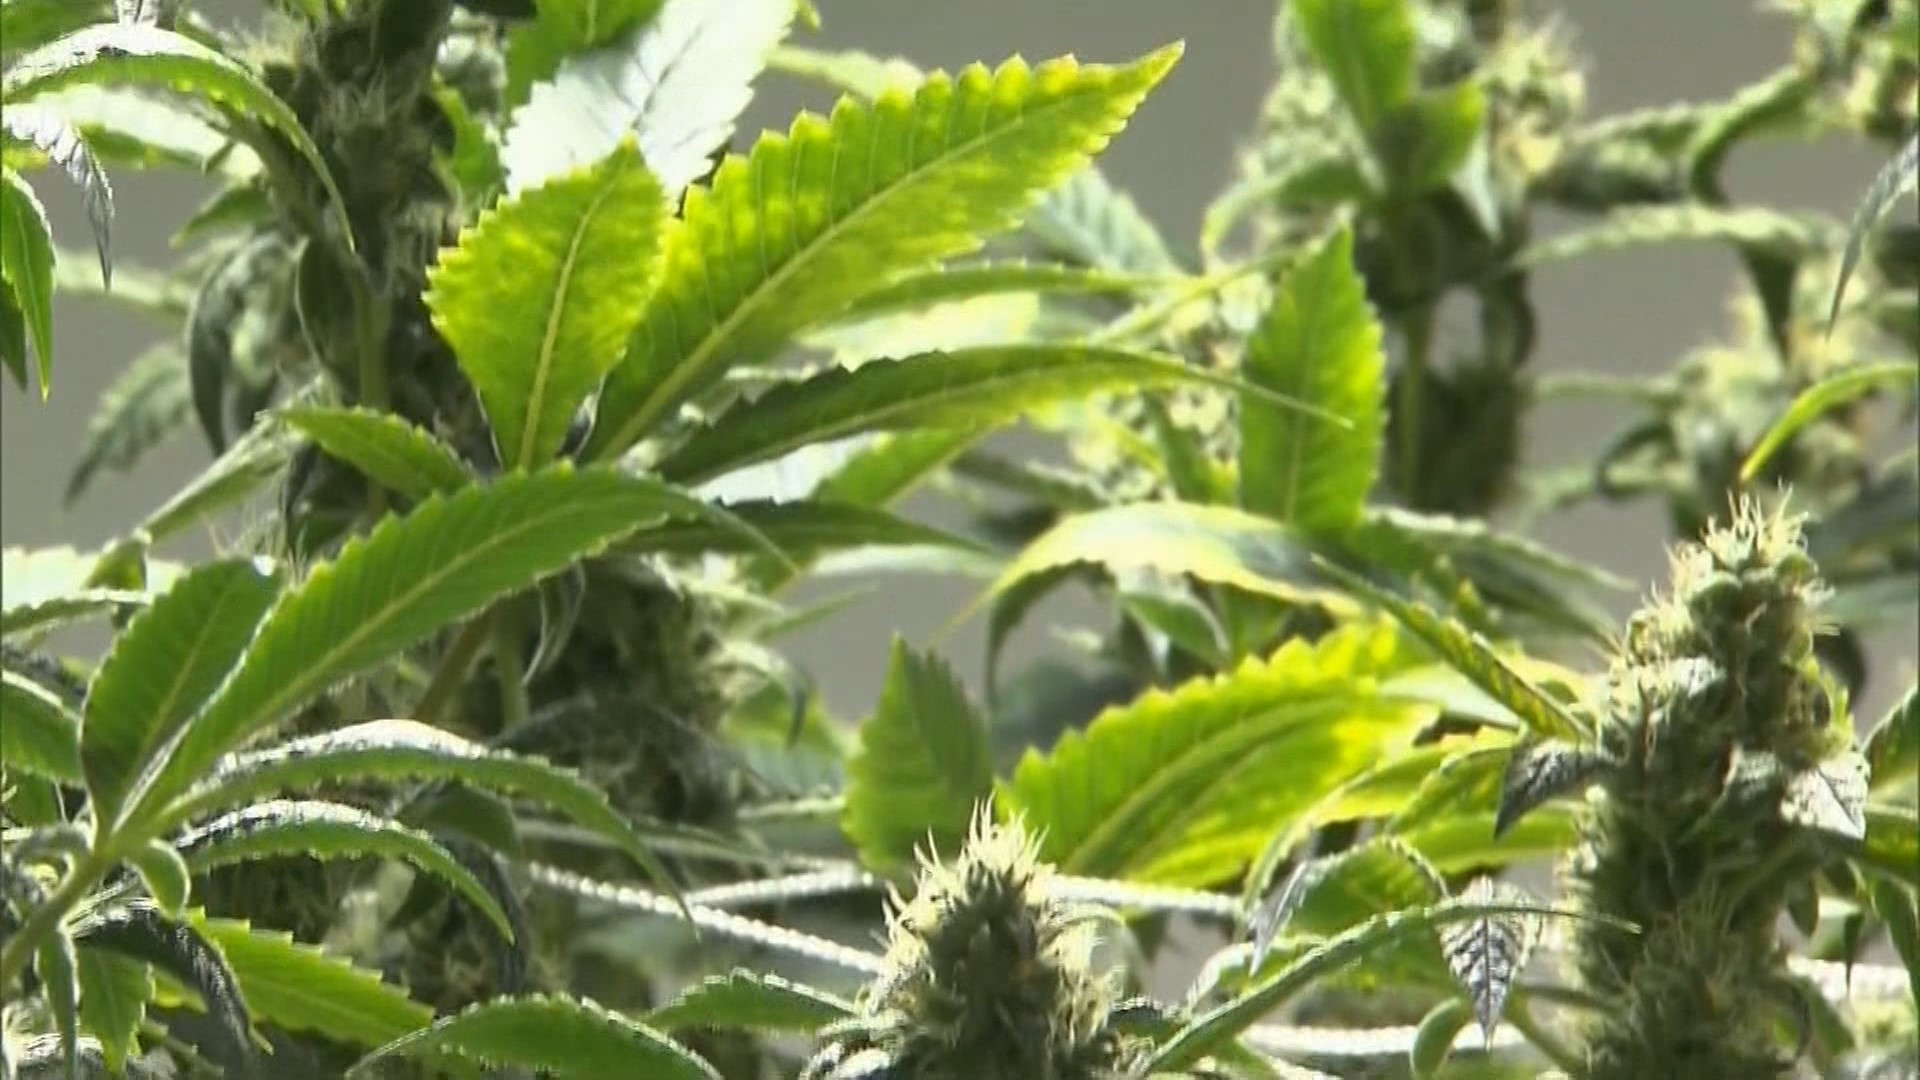 The House passed SB46, the medical marijuana bill, 68 to 34. The Senate voted to concur.